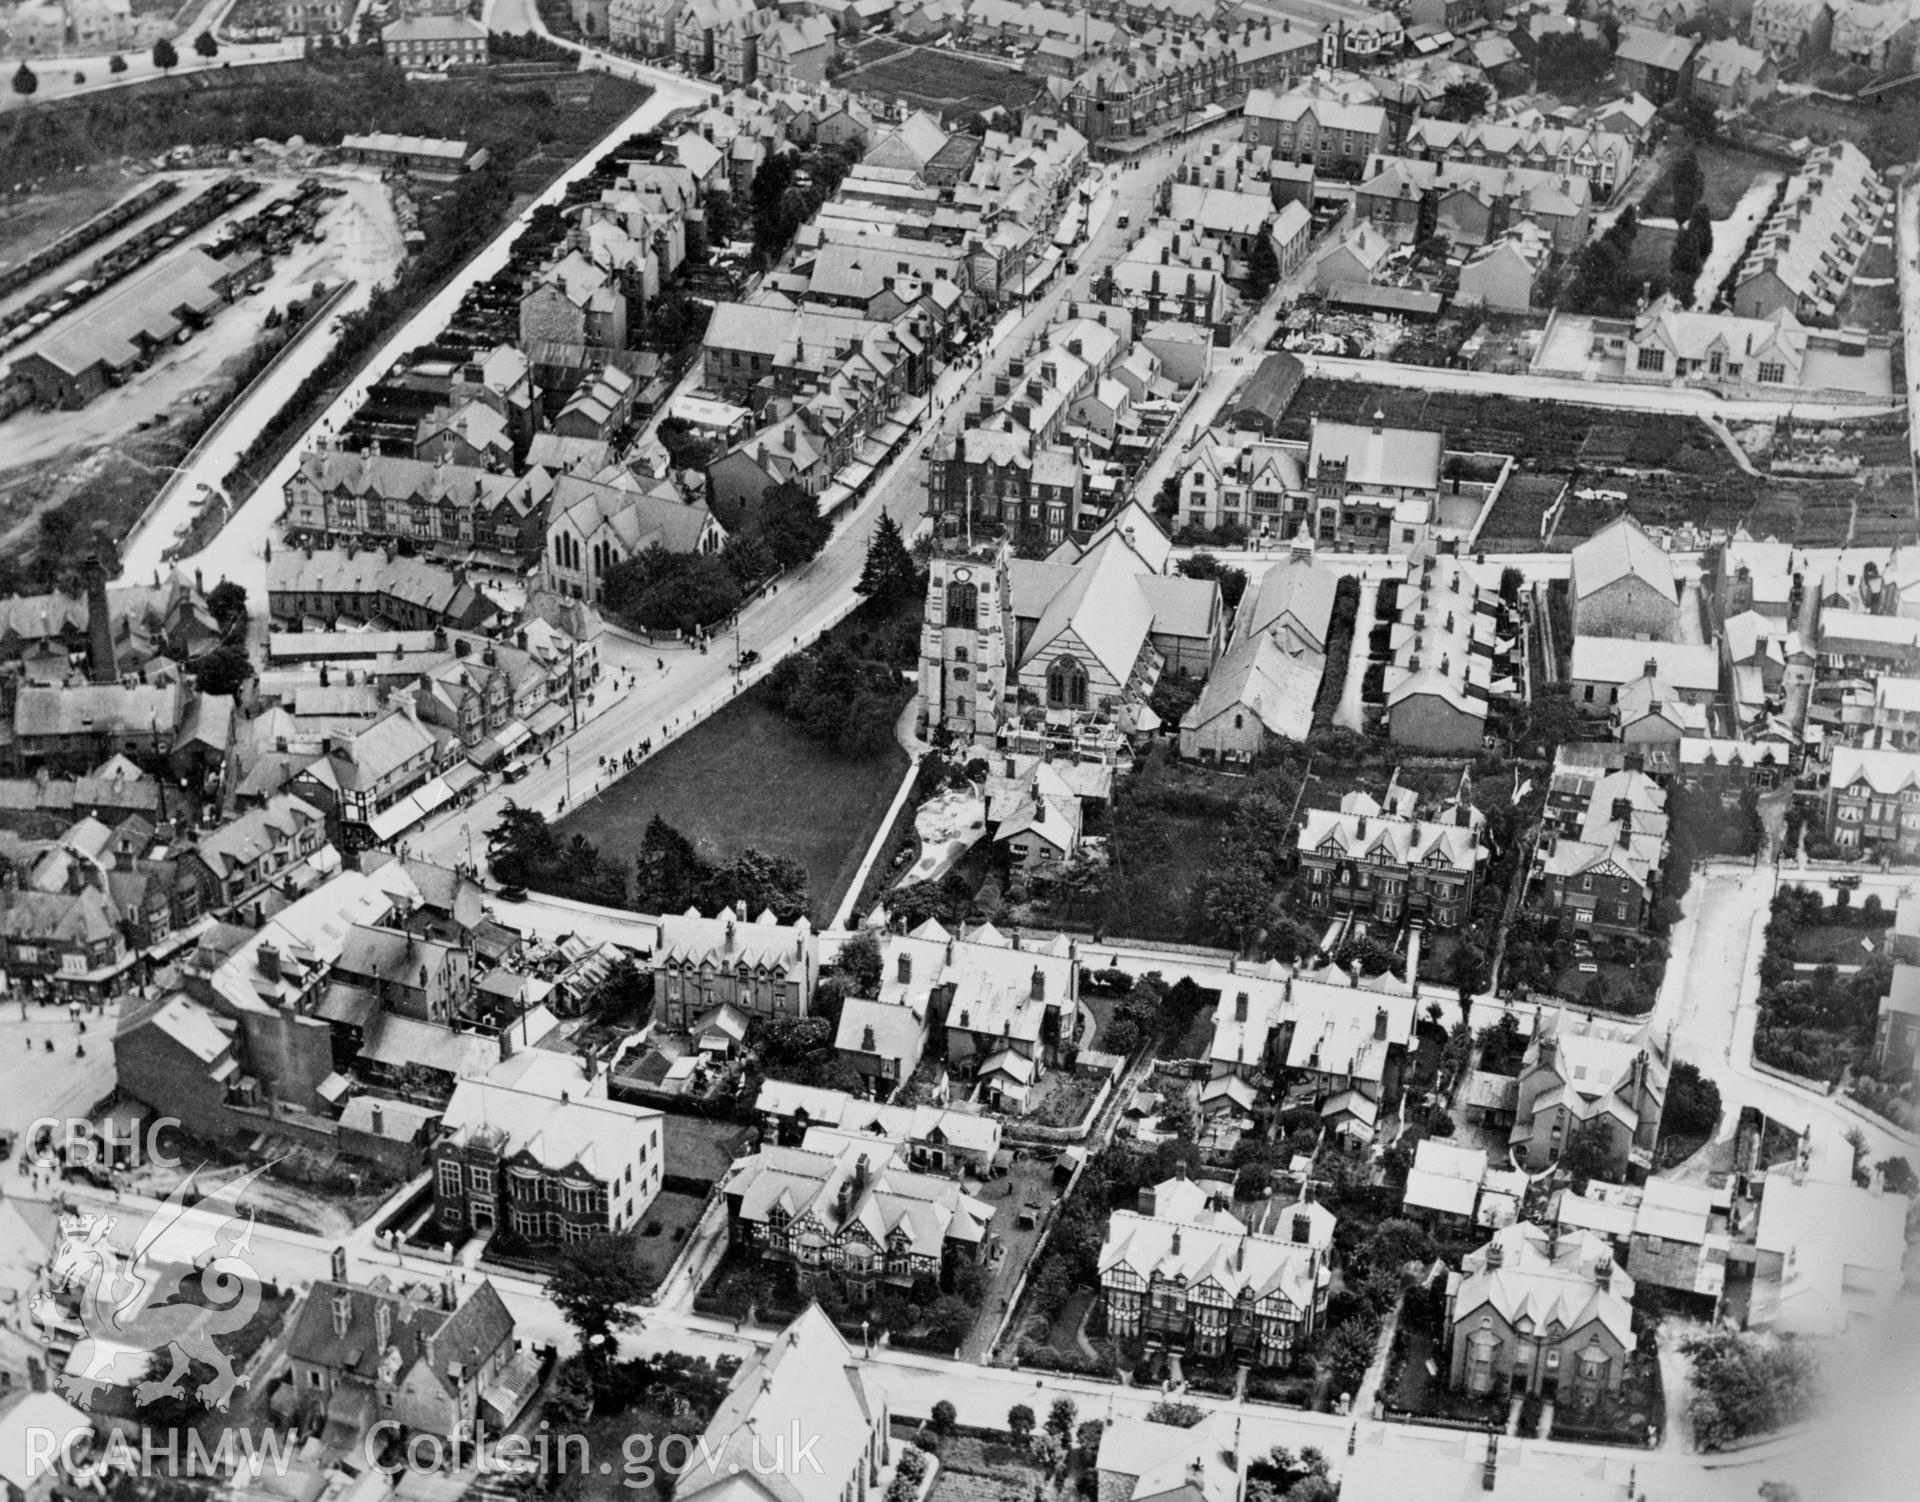 View of Colwyn Bay centred on St Paul's church. Oblique aerial photograph, 5?x4? BW glass plate.